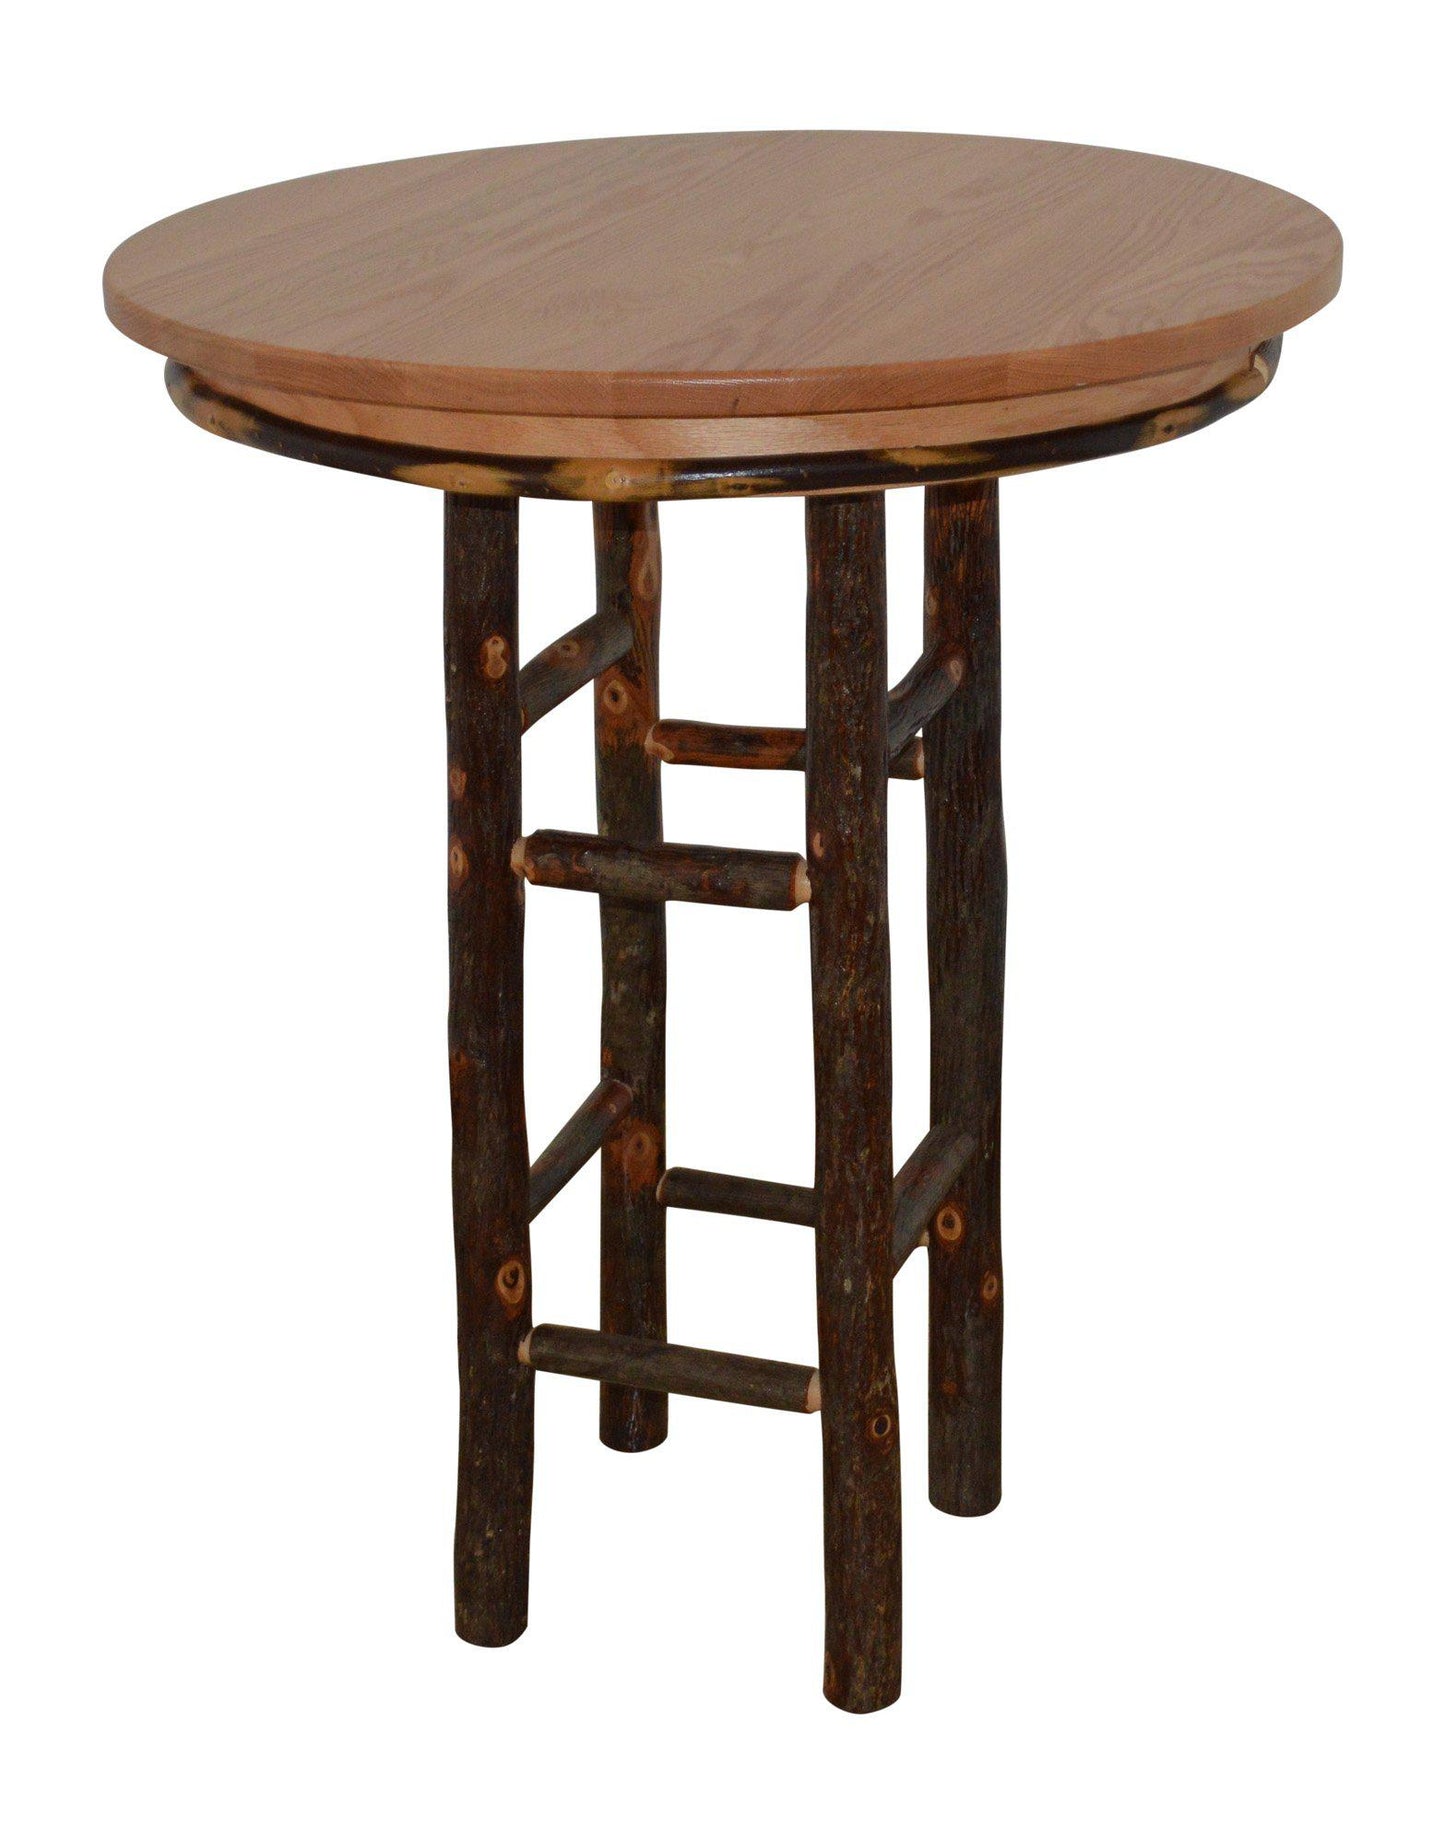 A&L Furniture Co. 33" Round Hickory Bar Table - LEAD TIME TO SHIP 10 BUSINESS DAYS